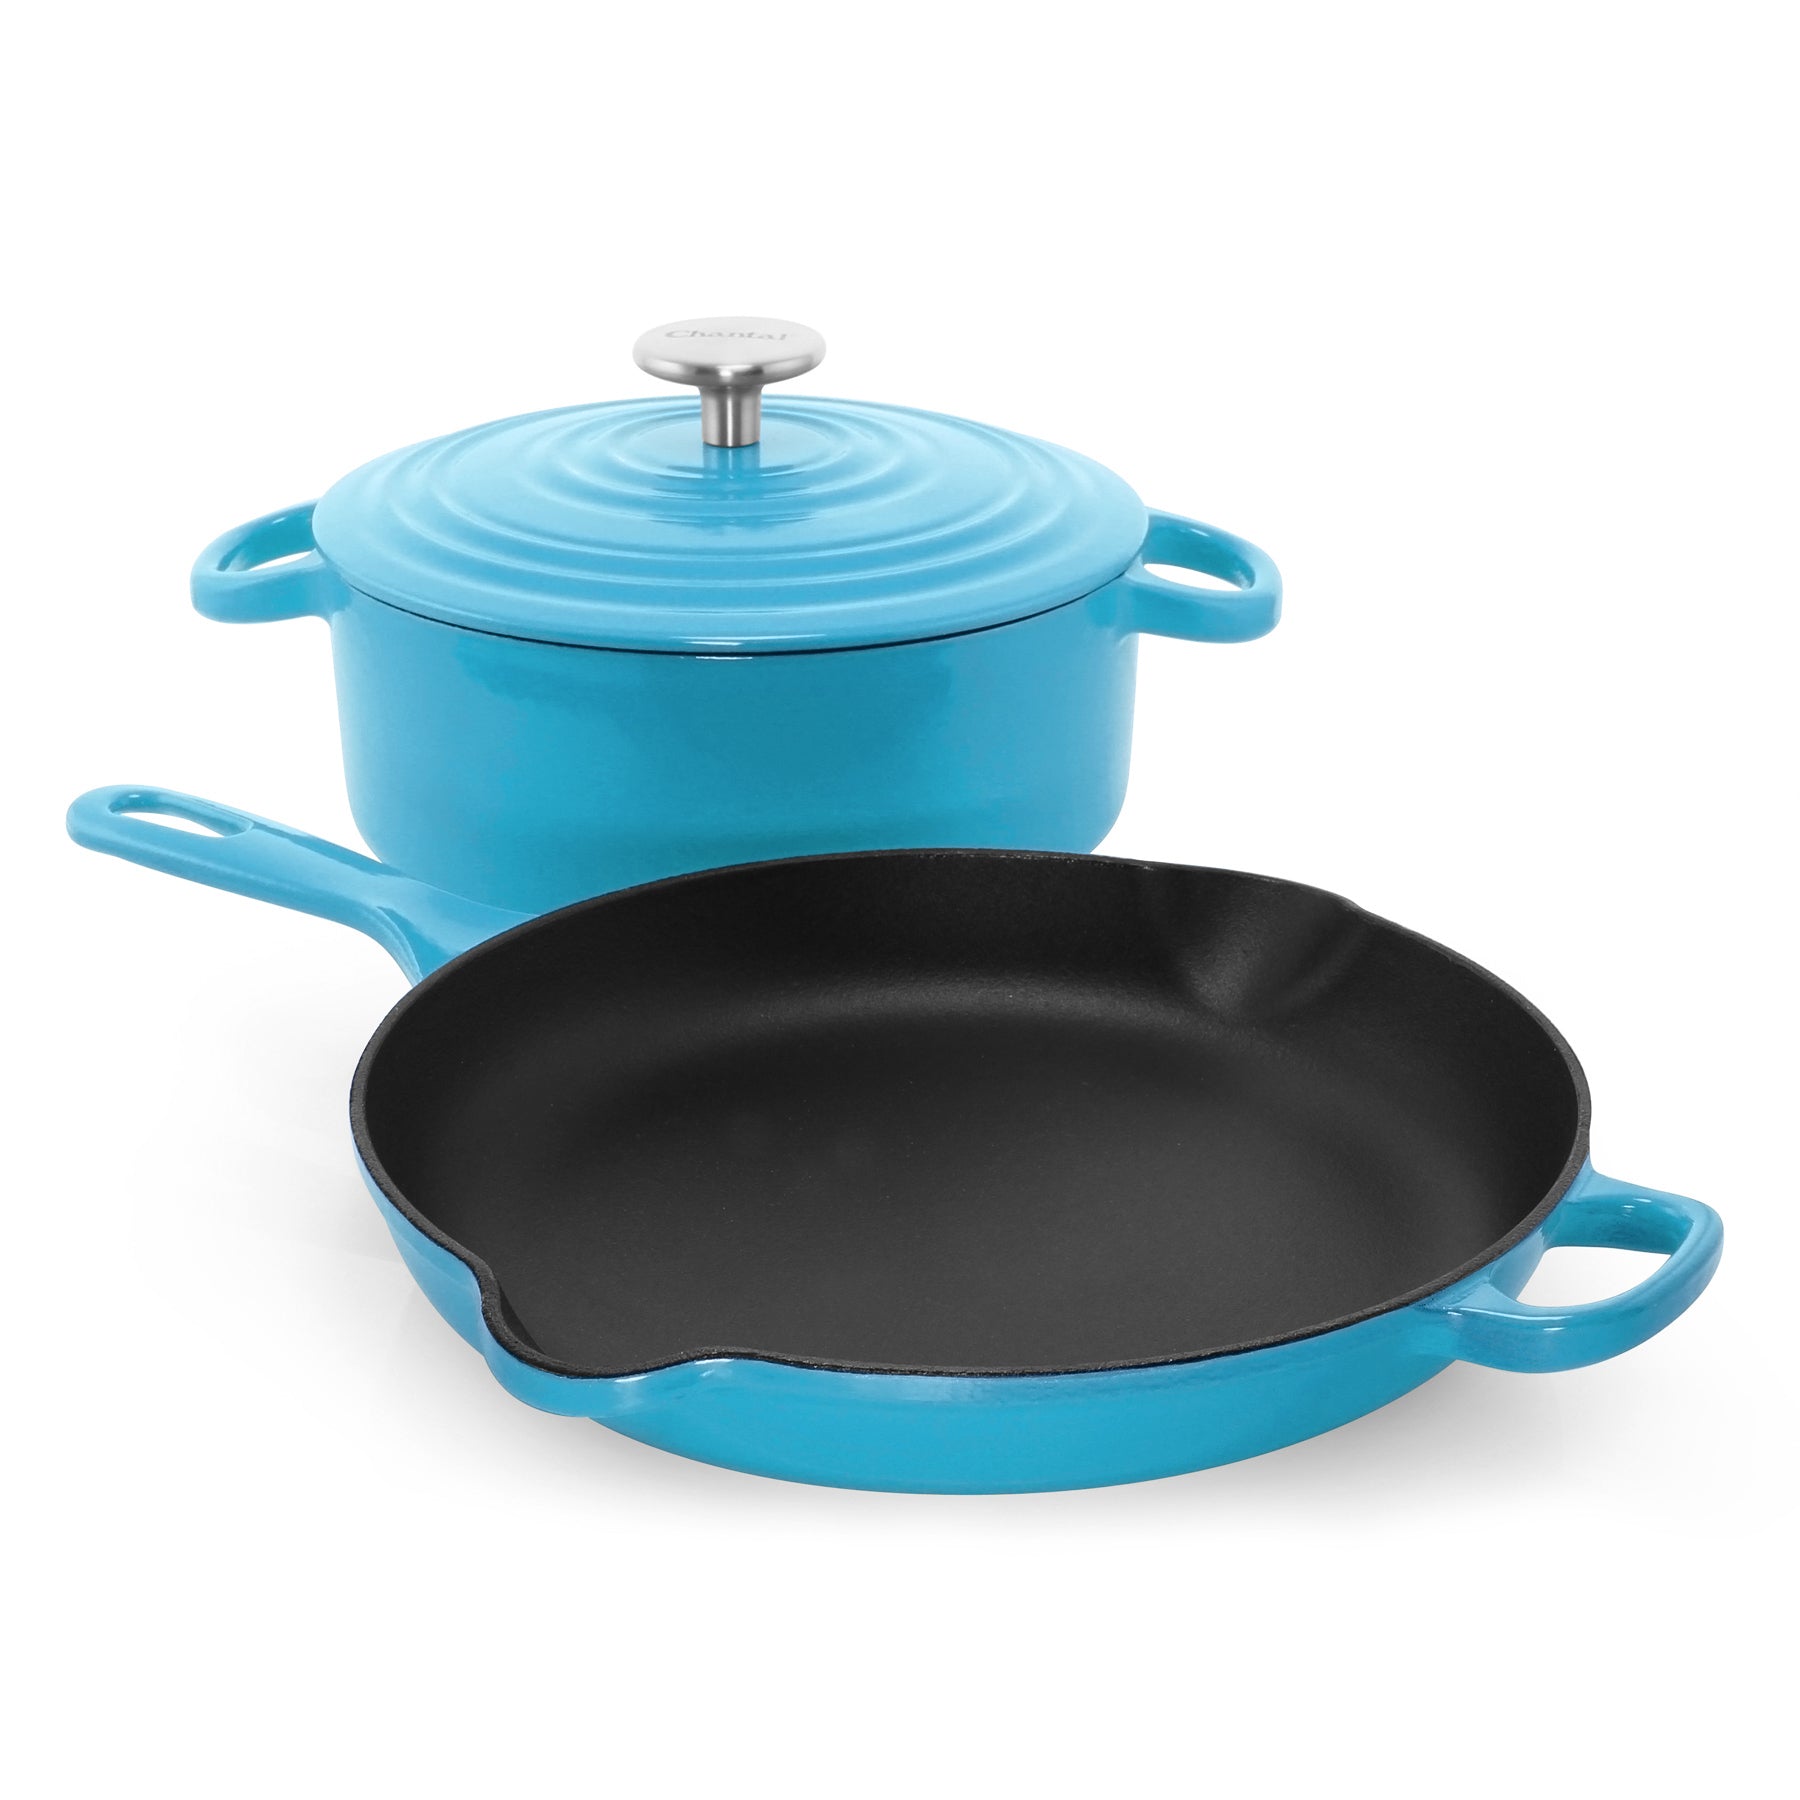 Cast Iron Dutch Oven with Lid-3 Quart Enamel Coated Pot for Oven